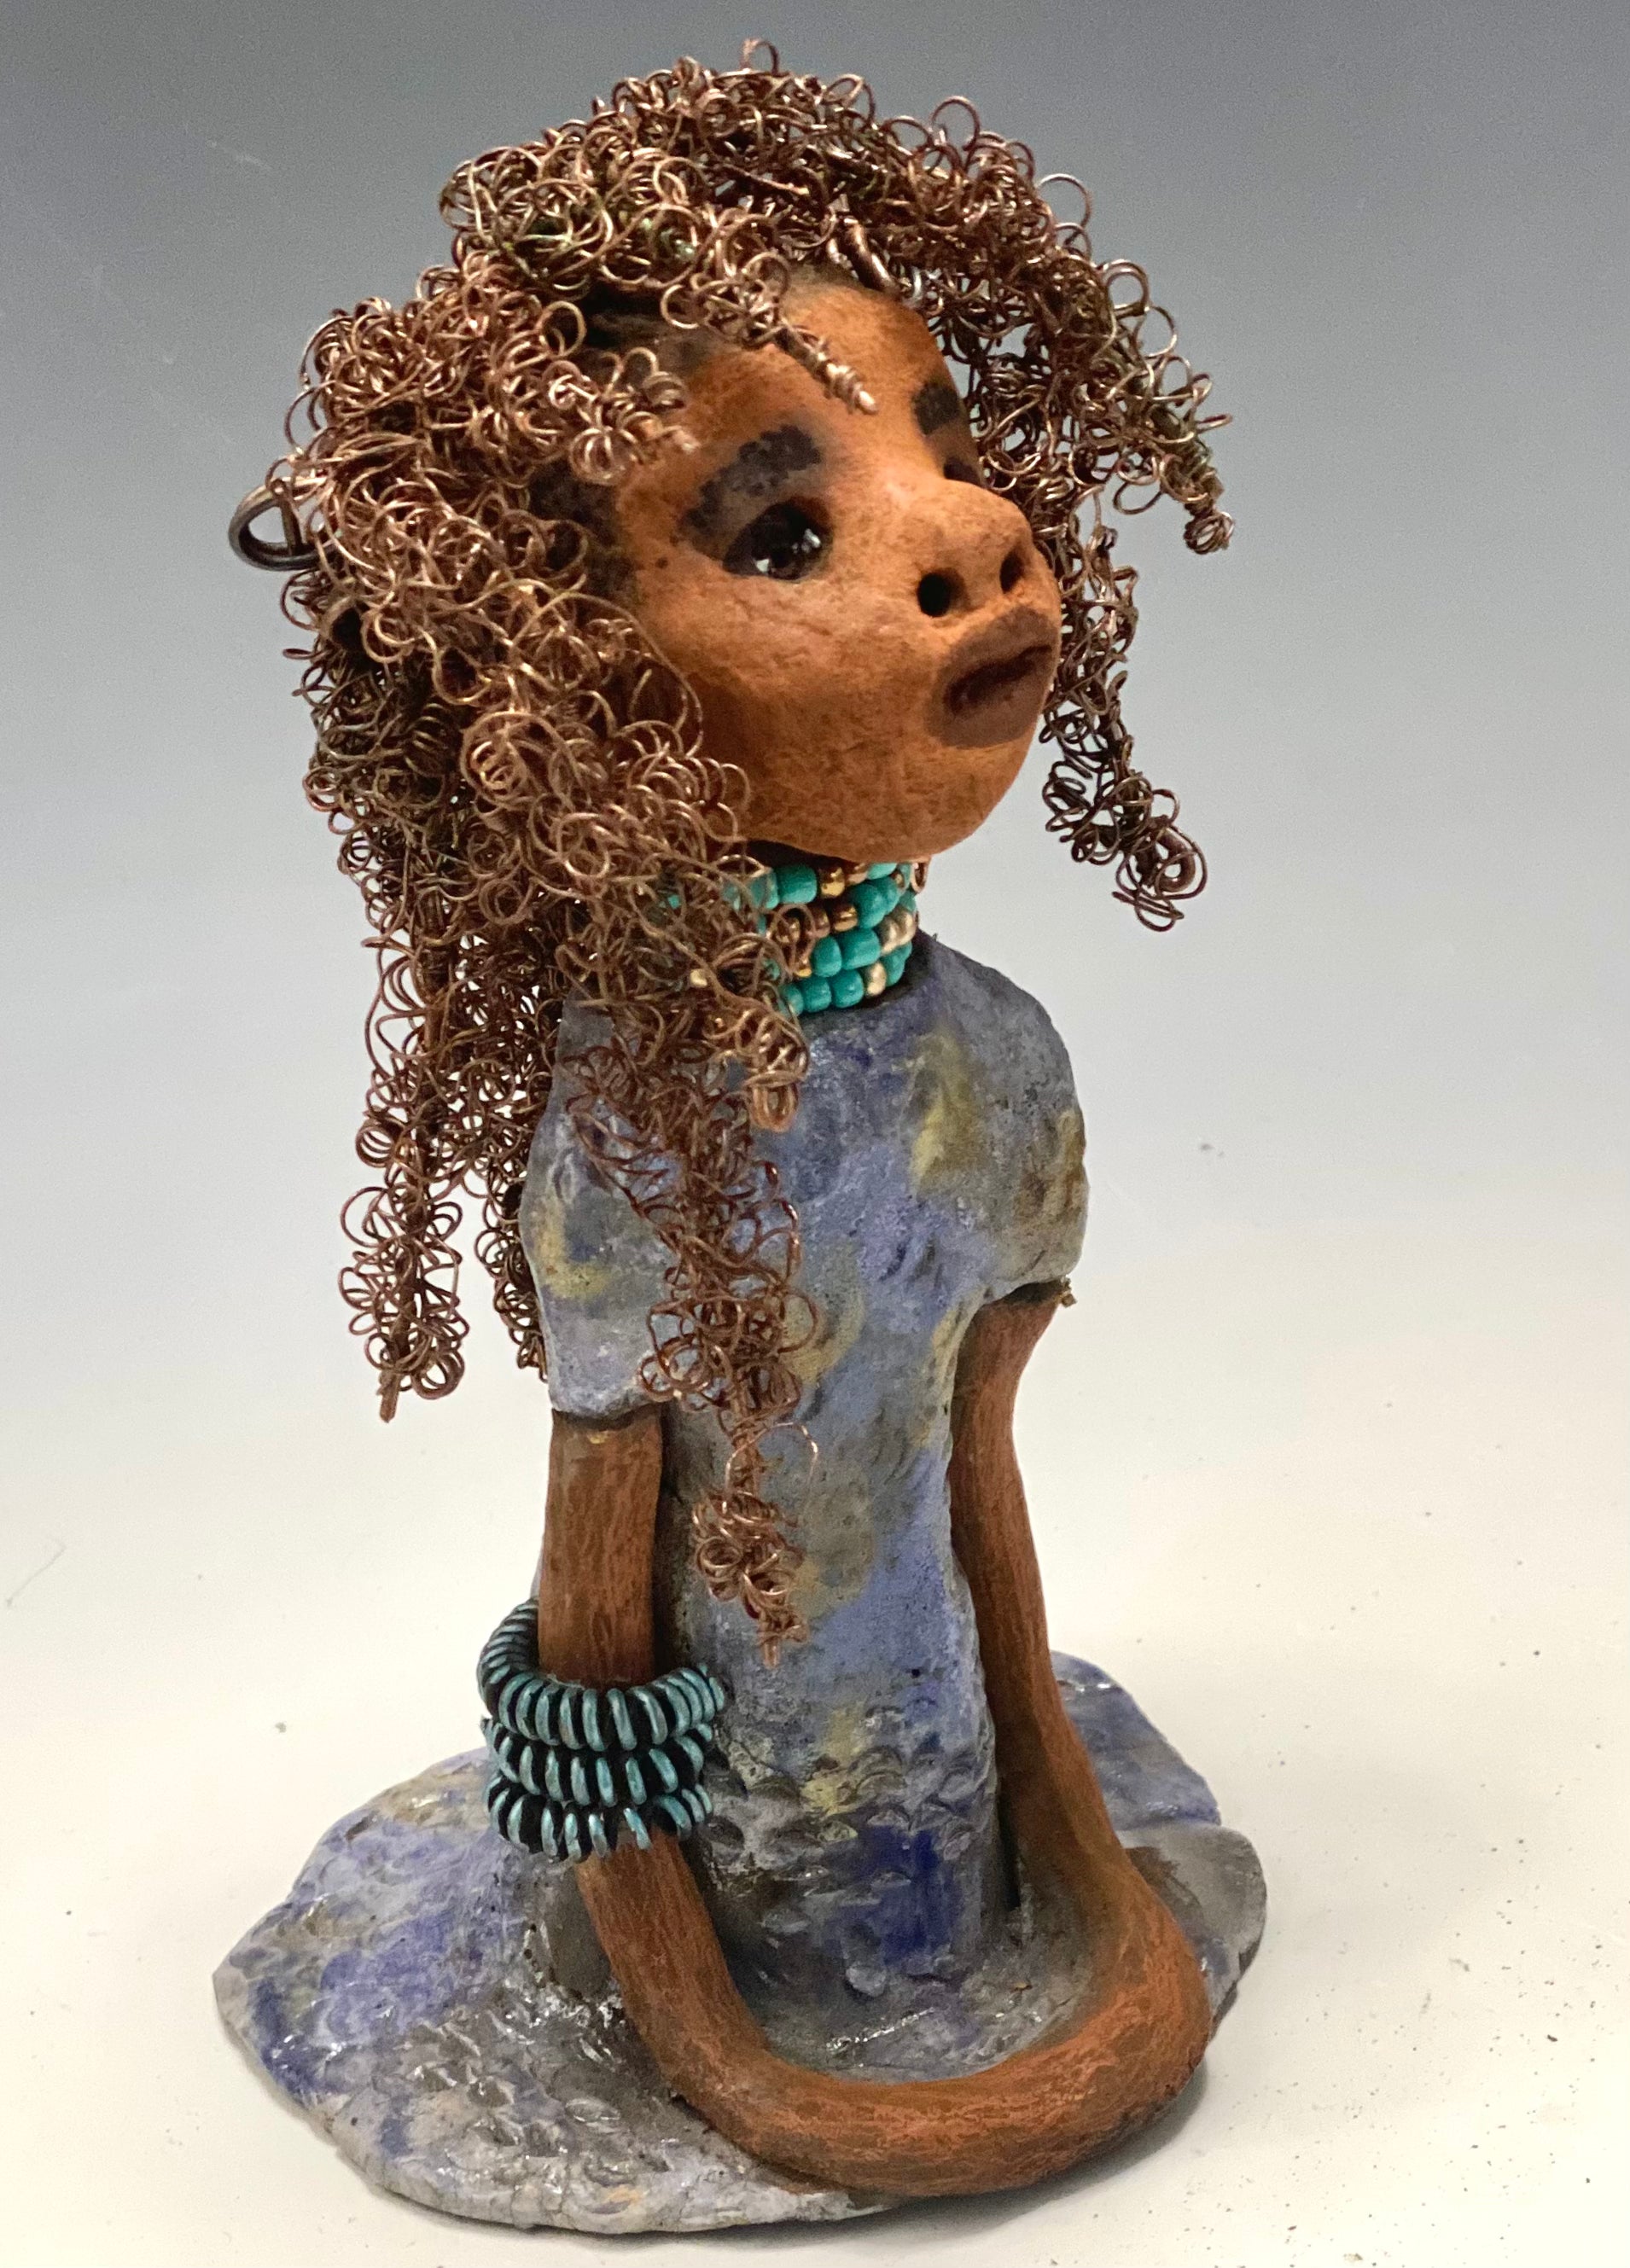 Meet Janae'! She has grown a head full of Hair! Janae' stands 8" x 5" x 4" and weighs 1.03 lbs. She has a lovely honey brown complexion with lovely reddish brown lips. Janae' wears a clay braided hairstyle. Janae' has a colorful metallic blue and gold glazed dress. She wears a blue and antique copper  beaded necklace. With eyes wide opened, Janae' has hopes of finding a new home.  